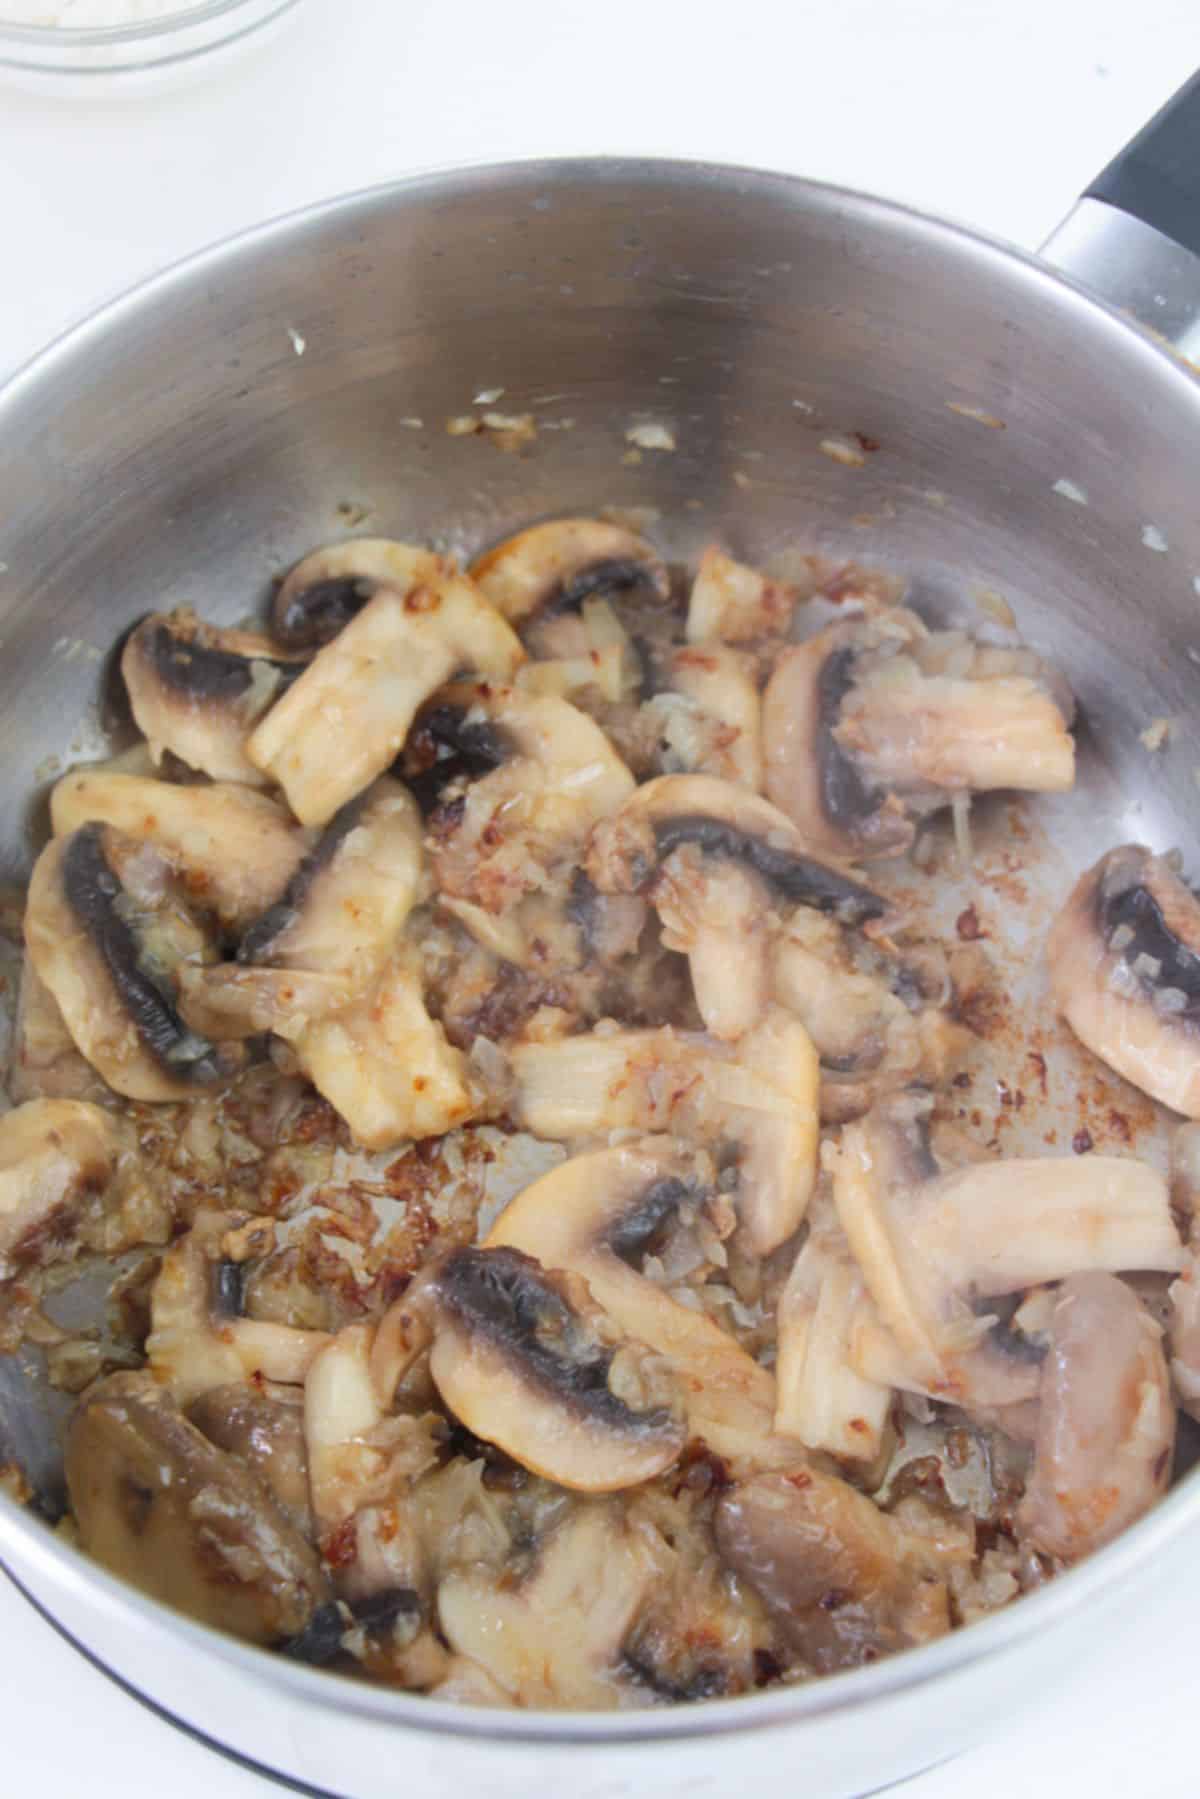 Mushrooms are added to the large pot.